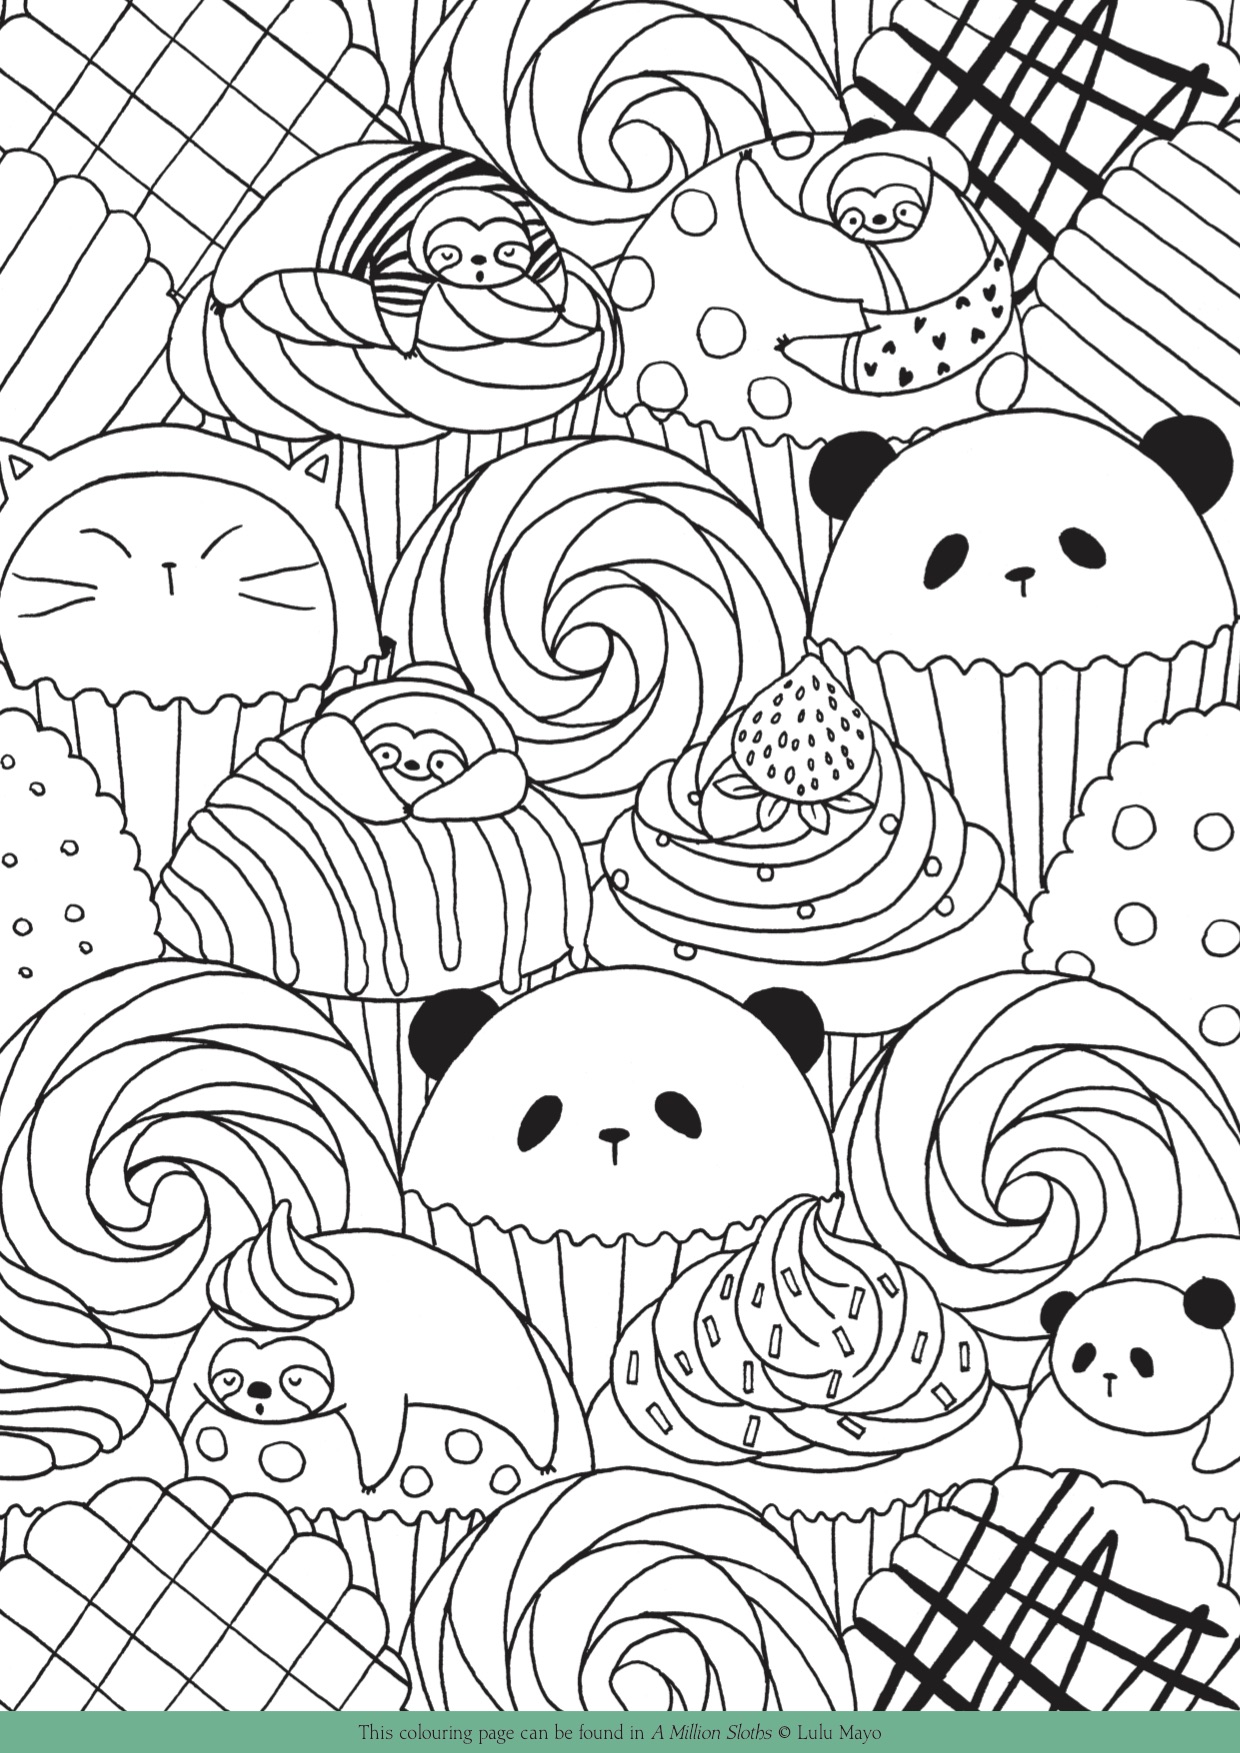 Free Downloadable Colouring Pages for Adults - Michael O ...